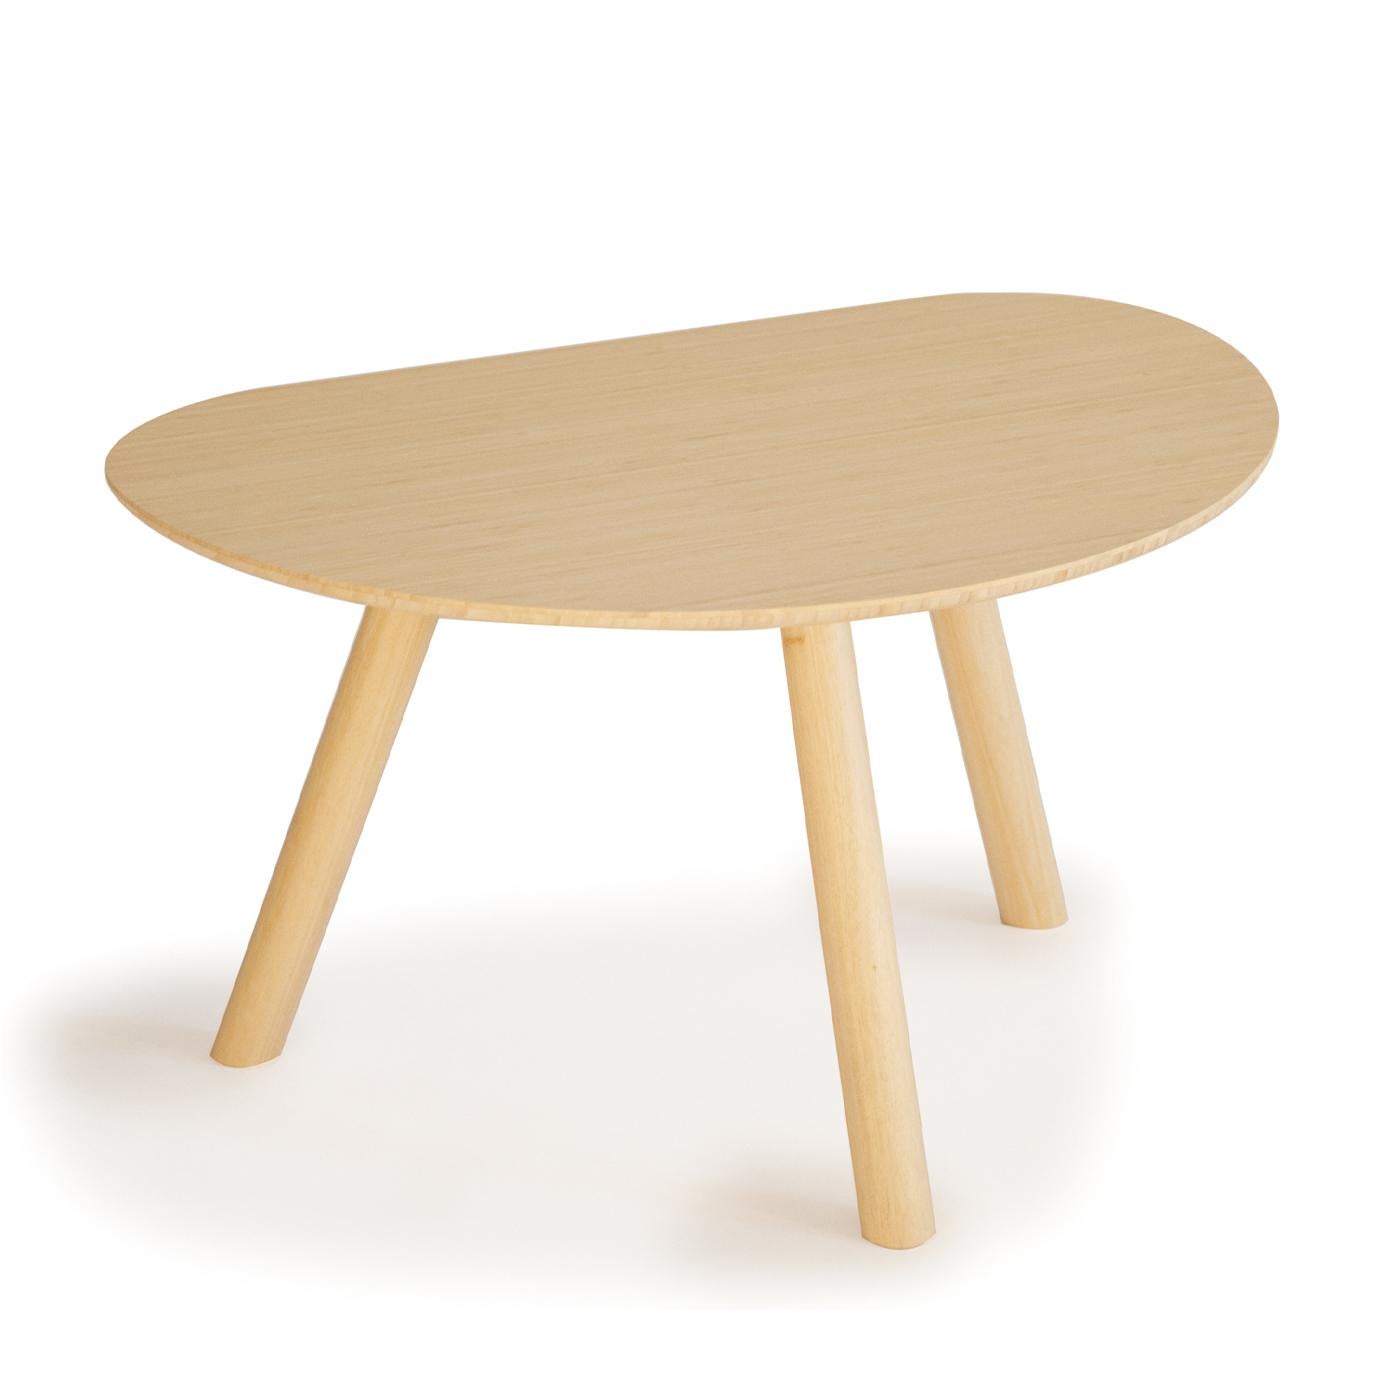 With endless combinations, this delightful pair of Disfatto Coffee Tables never look the same. Fun and easy, they will brighten the mood in any contemporary living space. Crafted in directional bamboo plywood with dried beech wood feet, they have